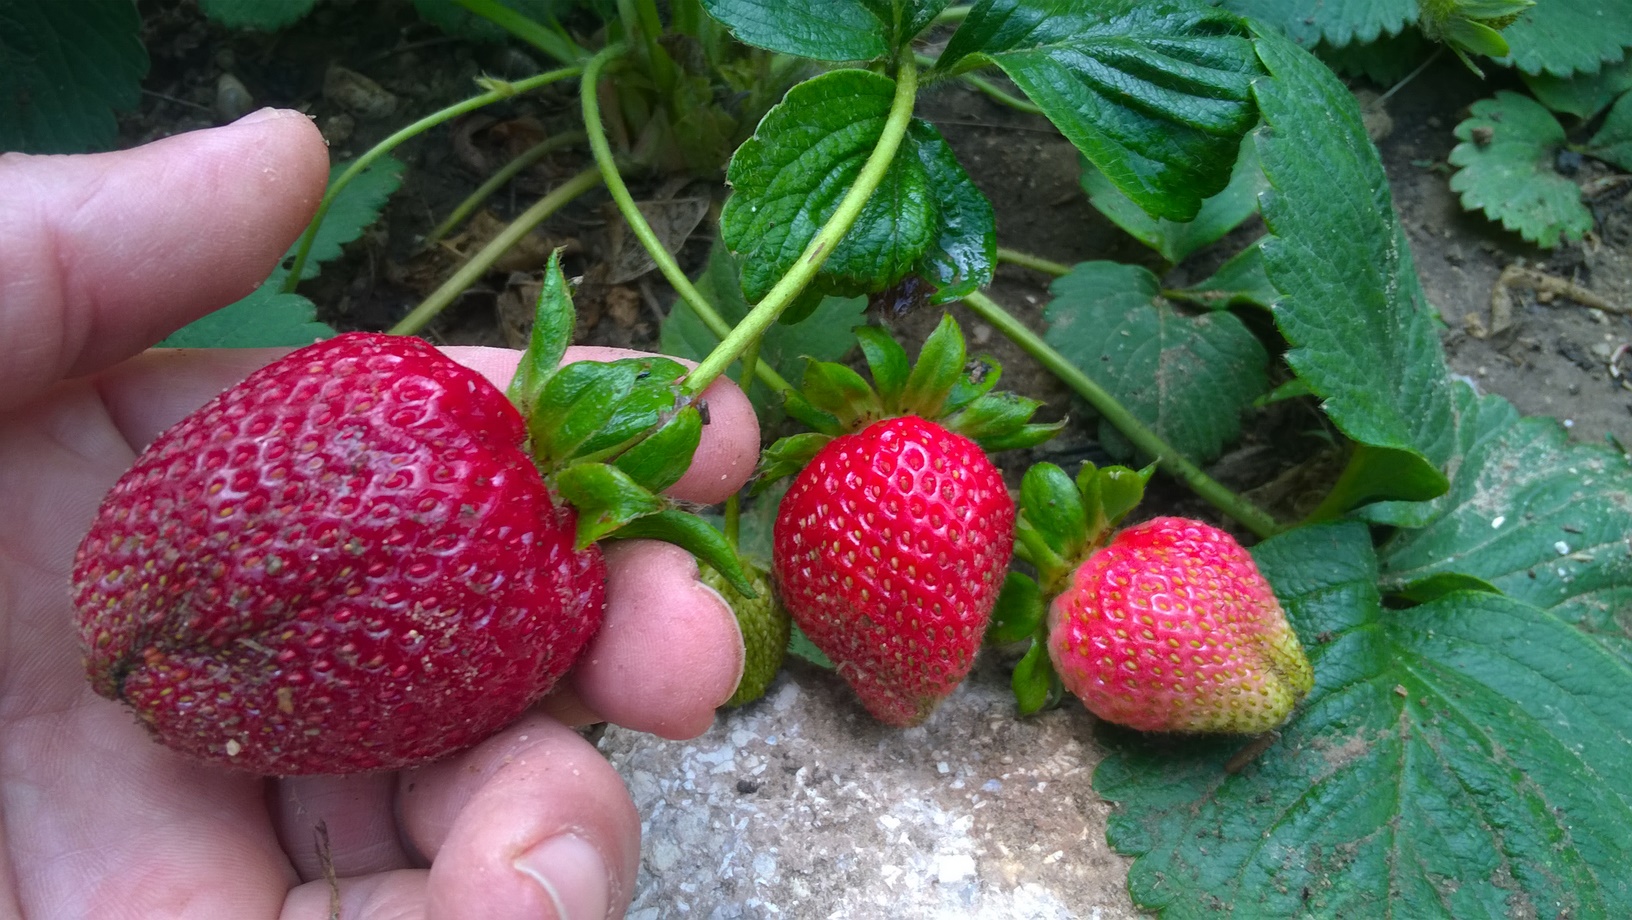 The easiest way to grow strawberries is to plant strong, vigorous young plants